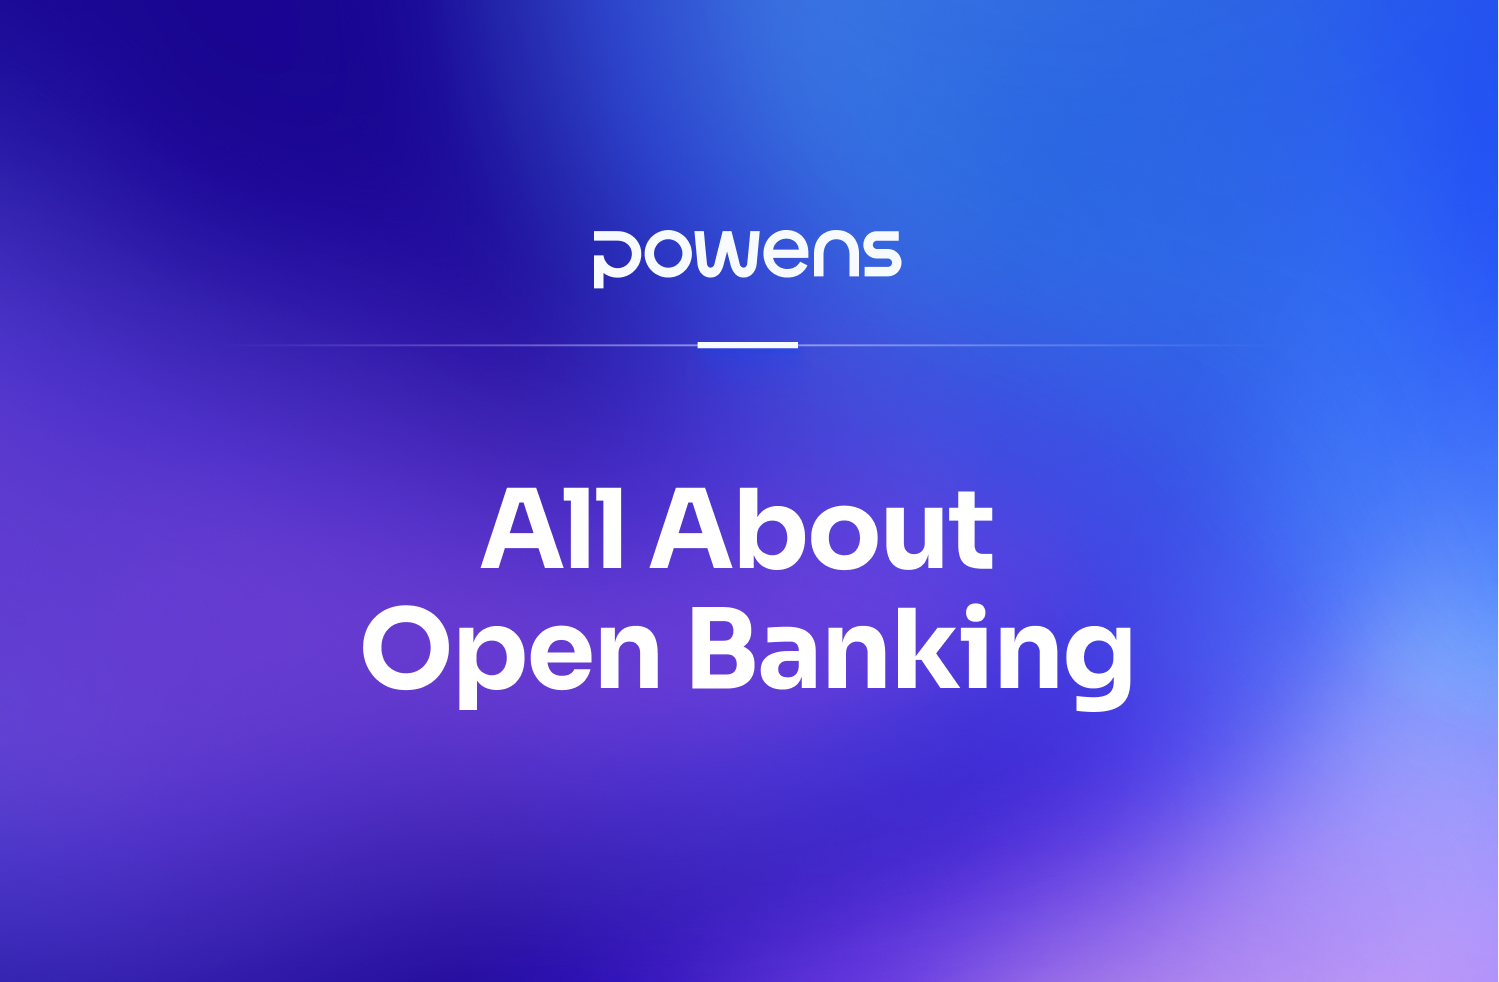 All about open banking